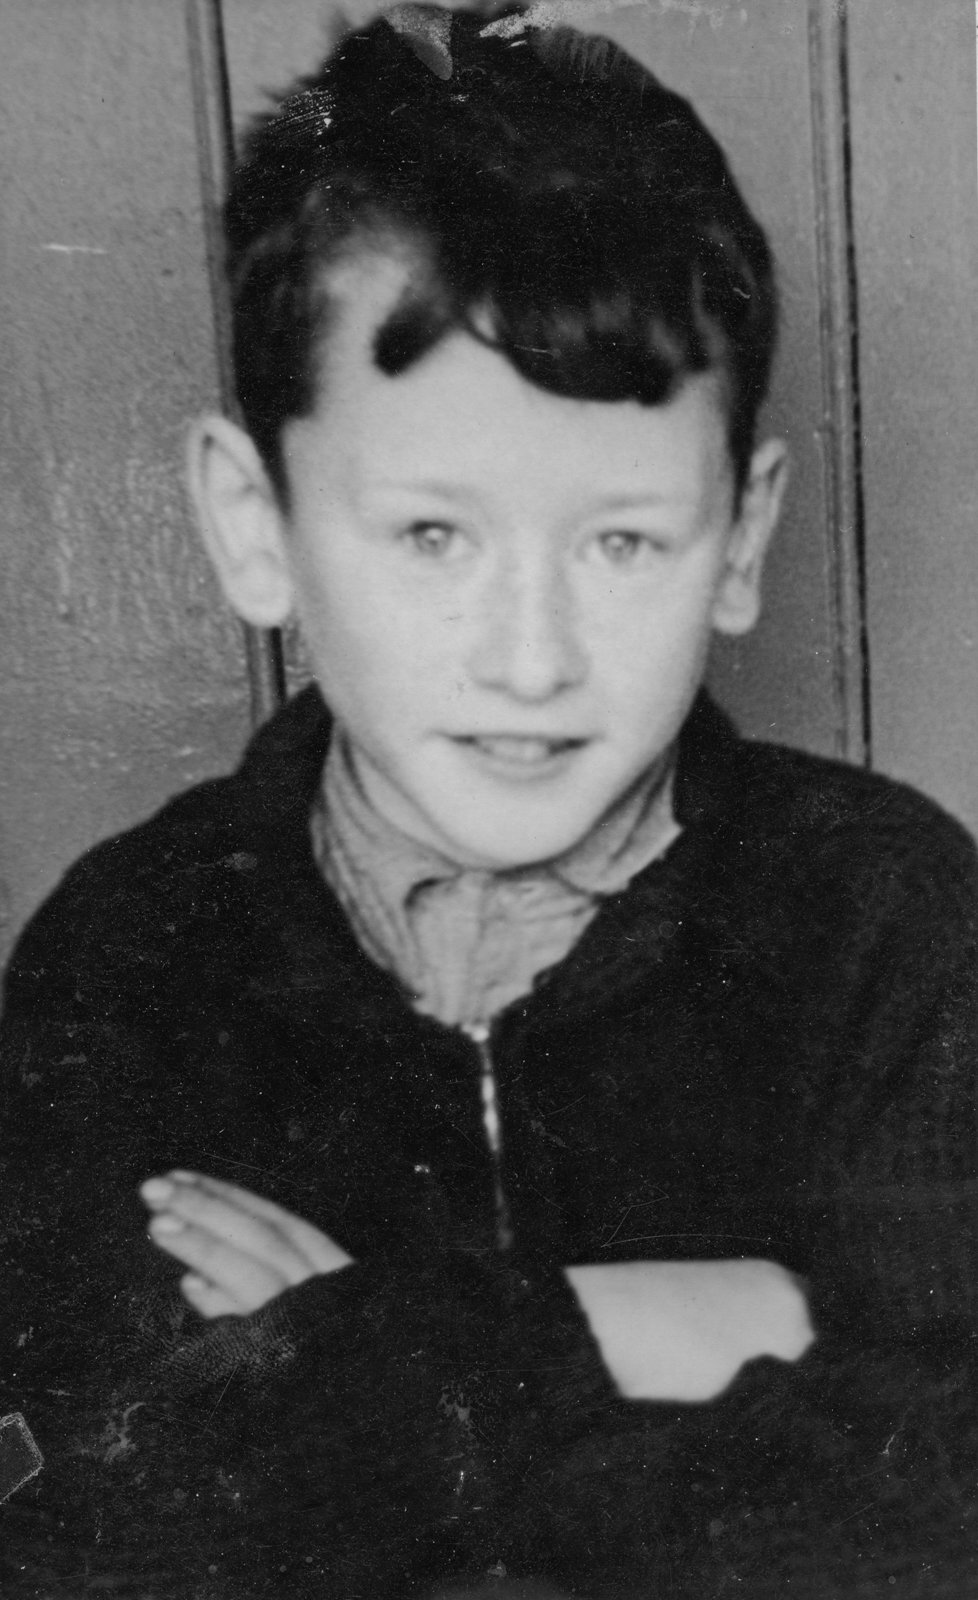 1960s portrait of Austin McGing Junior as a young boy, photographer unknown.